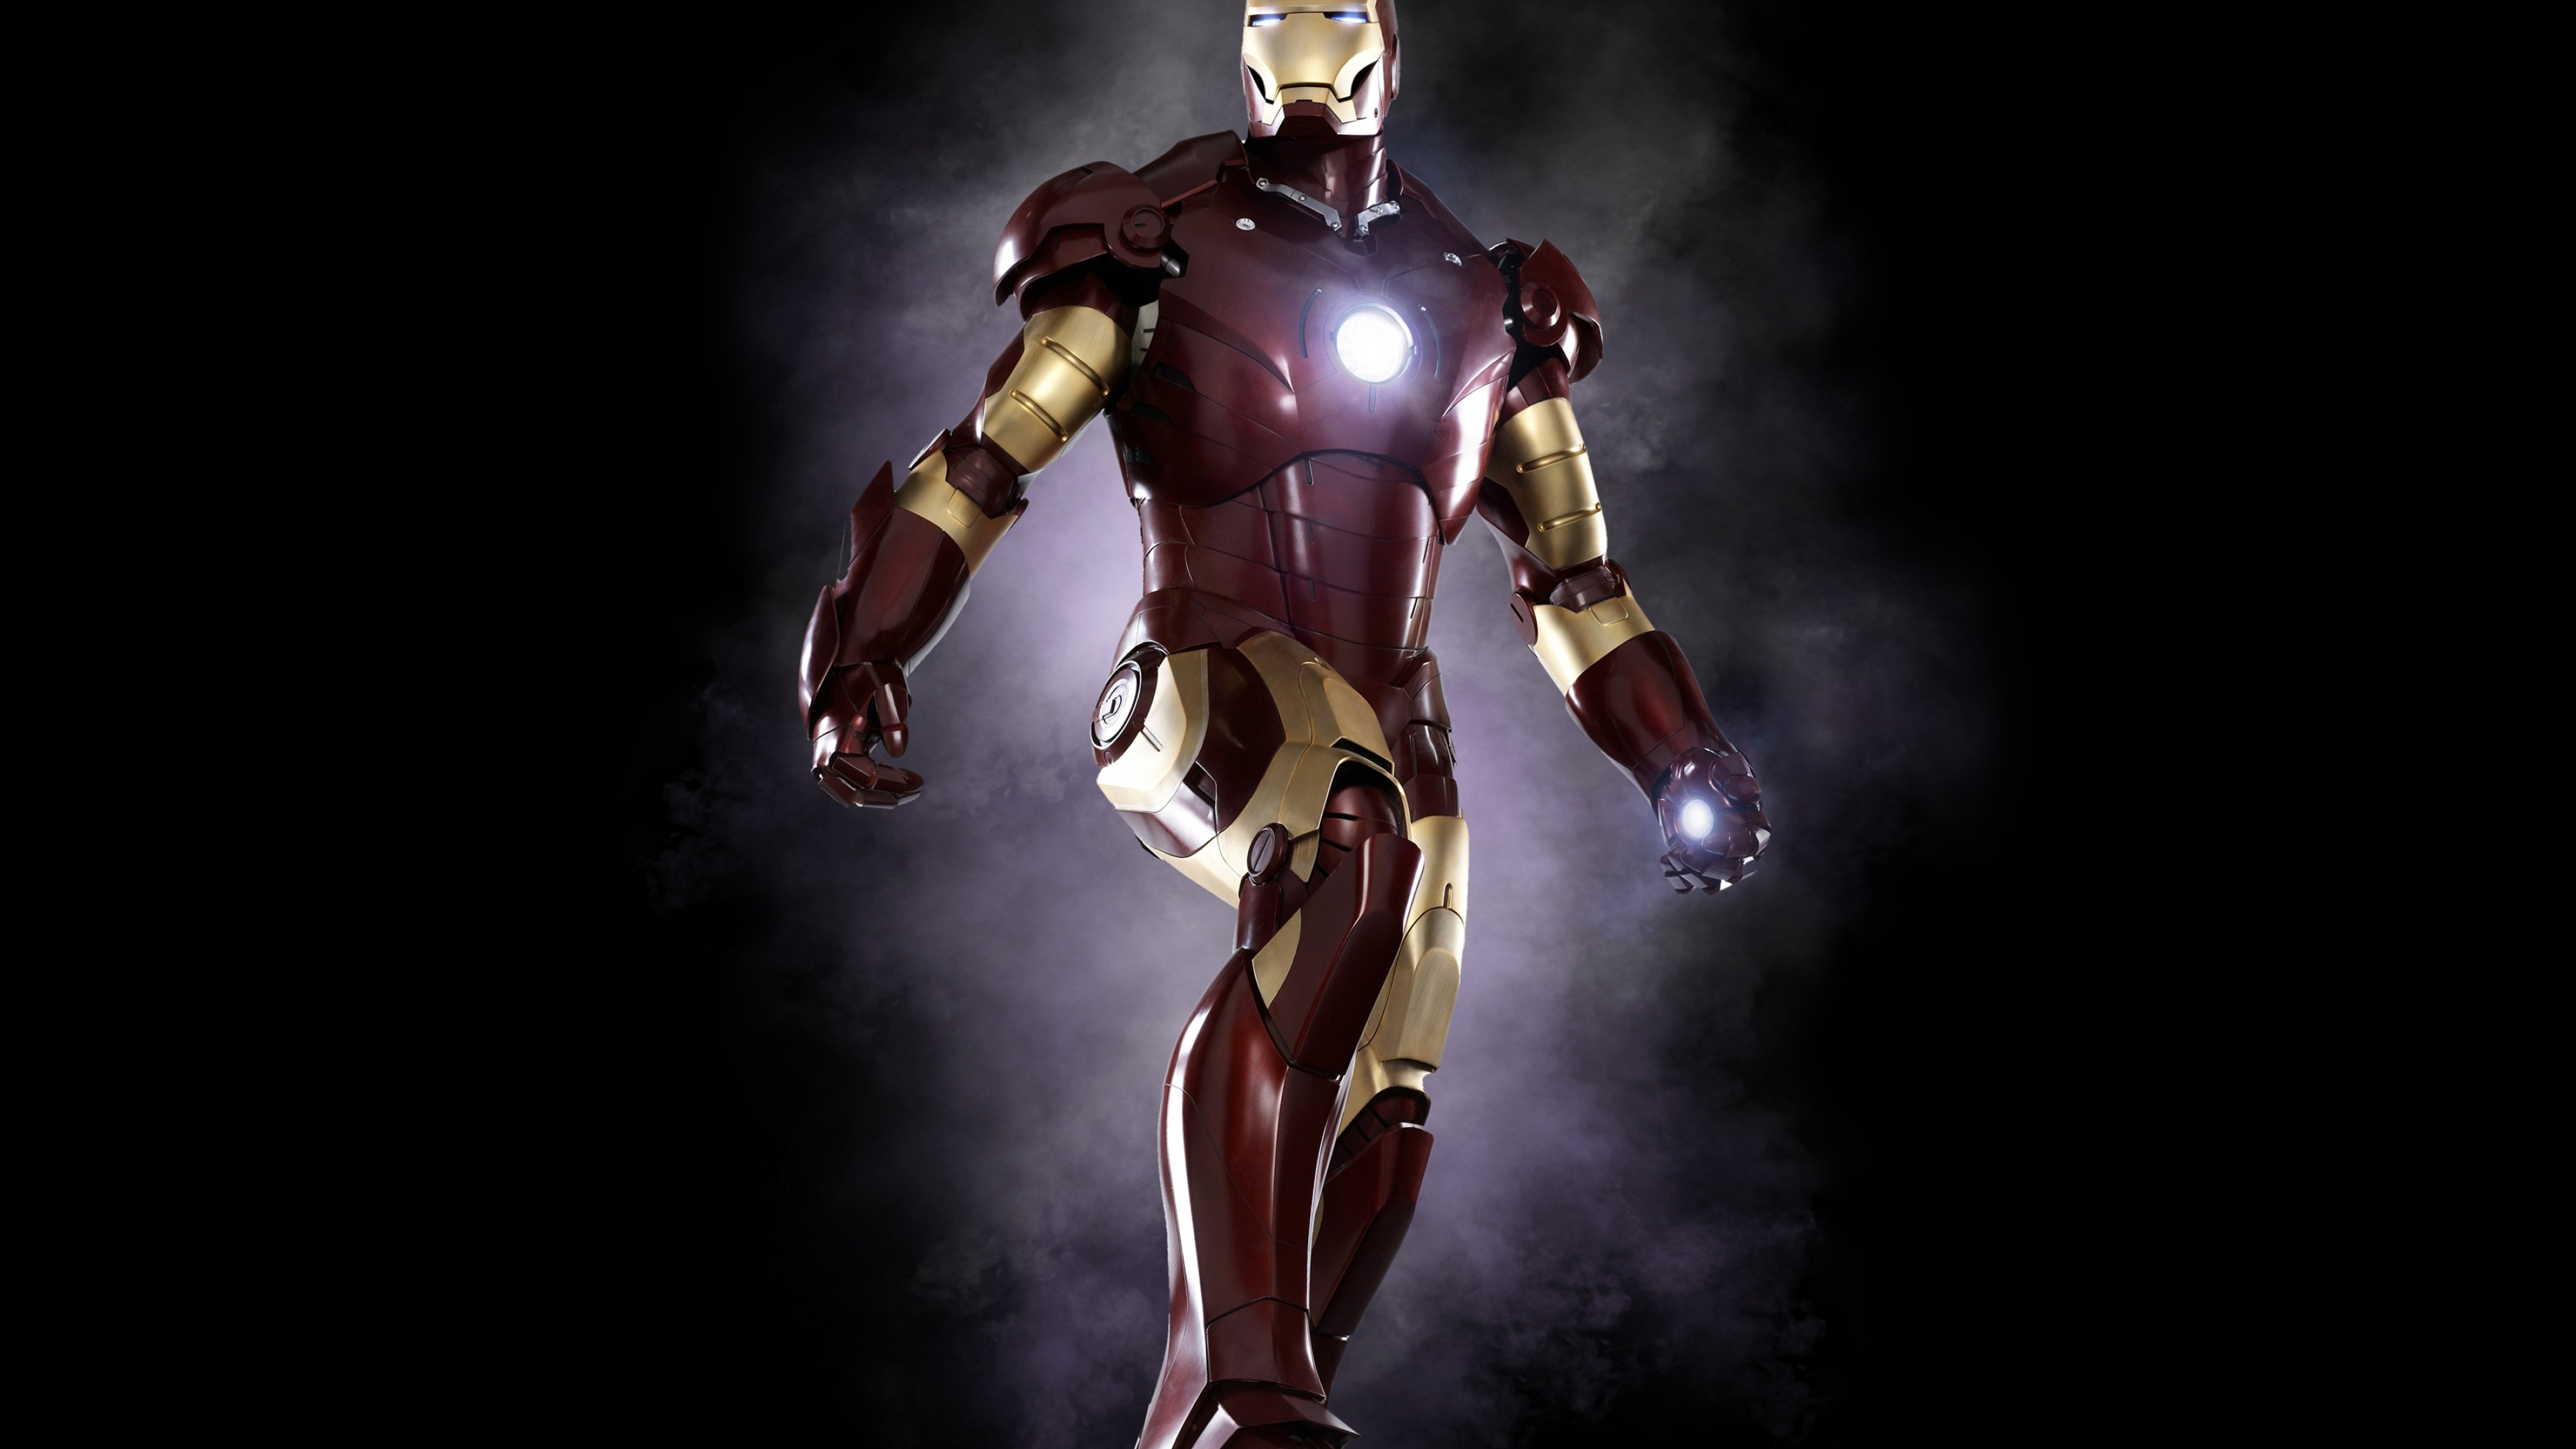 Iron Man: A fictional character and superhero in Marvel Comics. 3840x2160 4K Background.